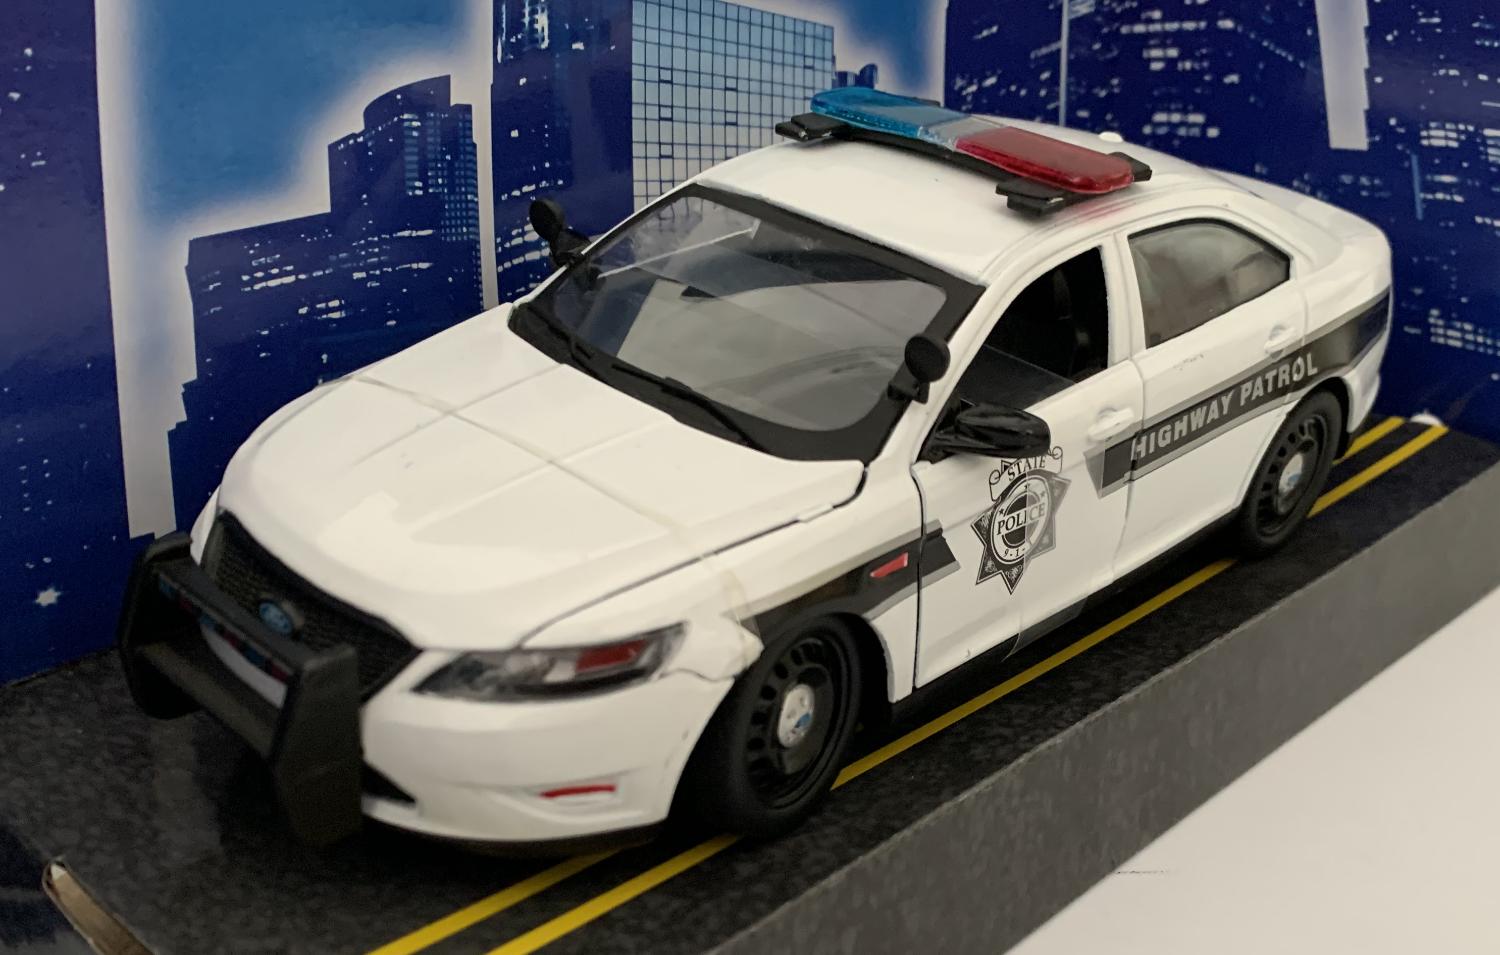 An excellent scale model of a Ford Police Interceptor car decorated in white with authentic graphics, black and silver wheels.